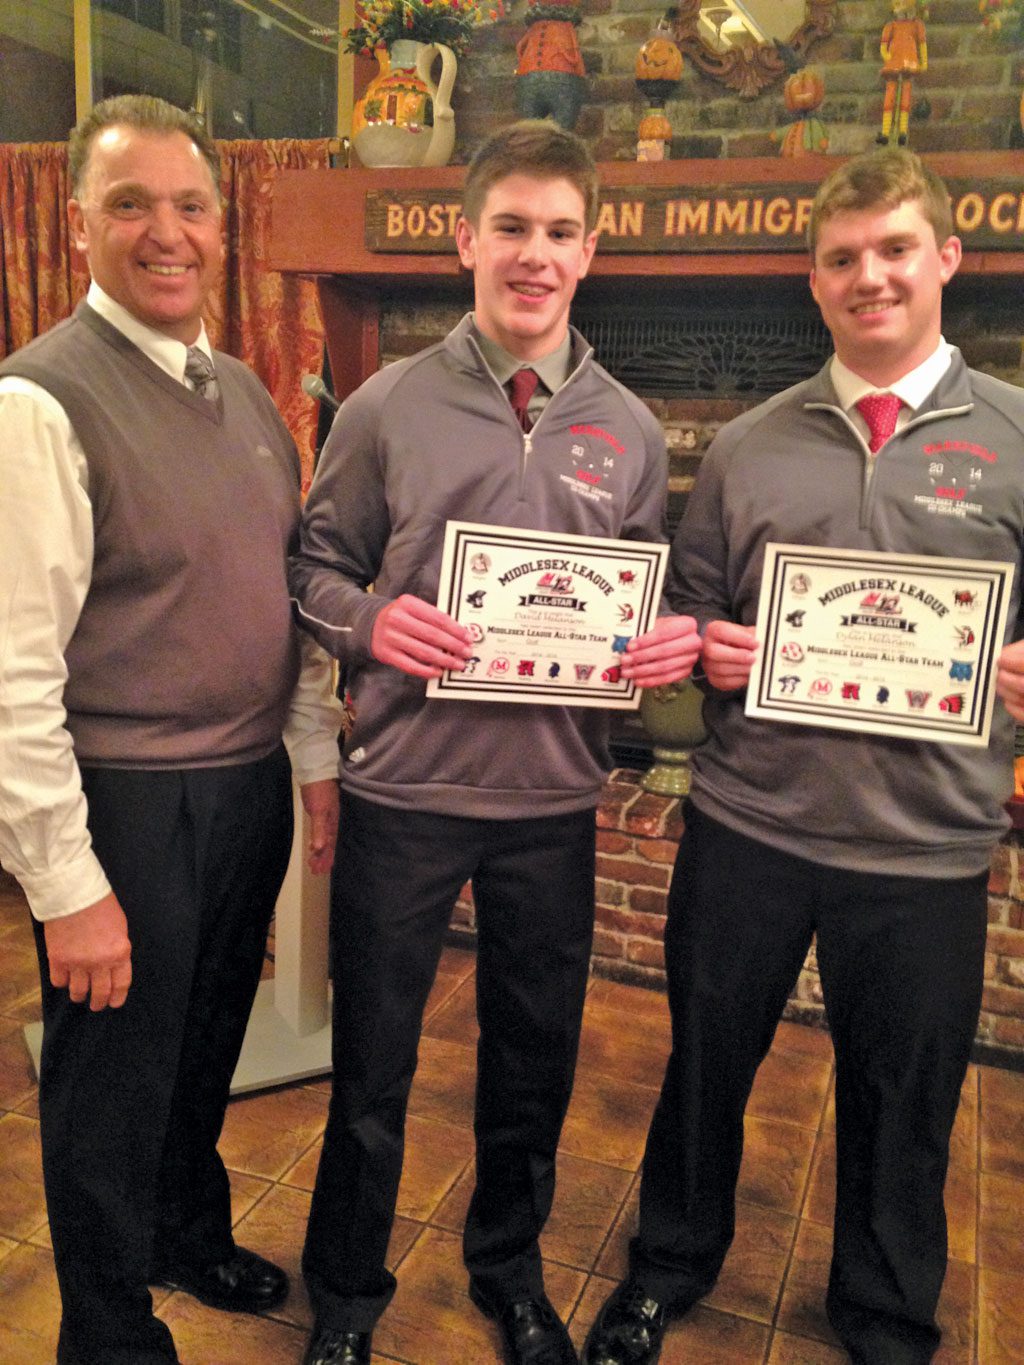 WAKEFIELD’S TWO Middlesex League Freedom division all-stars were presented with certificates at the team’s recent banquet. From left to right are Head Coach Dennis Bisso and Middlesex League All-Stars David Melanson and Dylan Melanson.